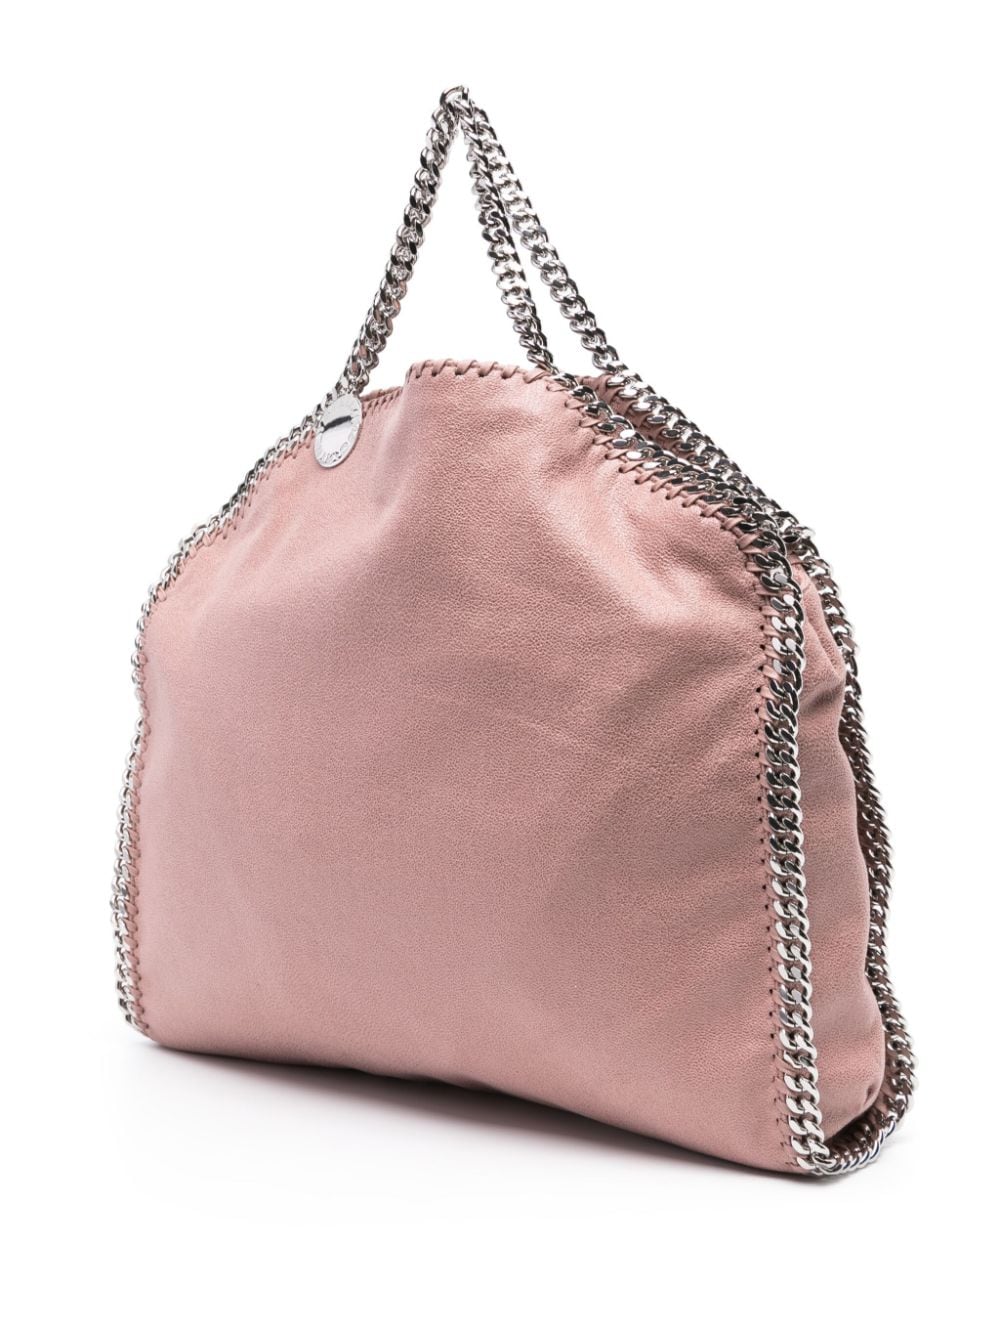 3chain Tote Eco Shaggy Deer W/Palladium Color Chain, pink